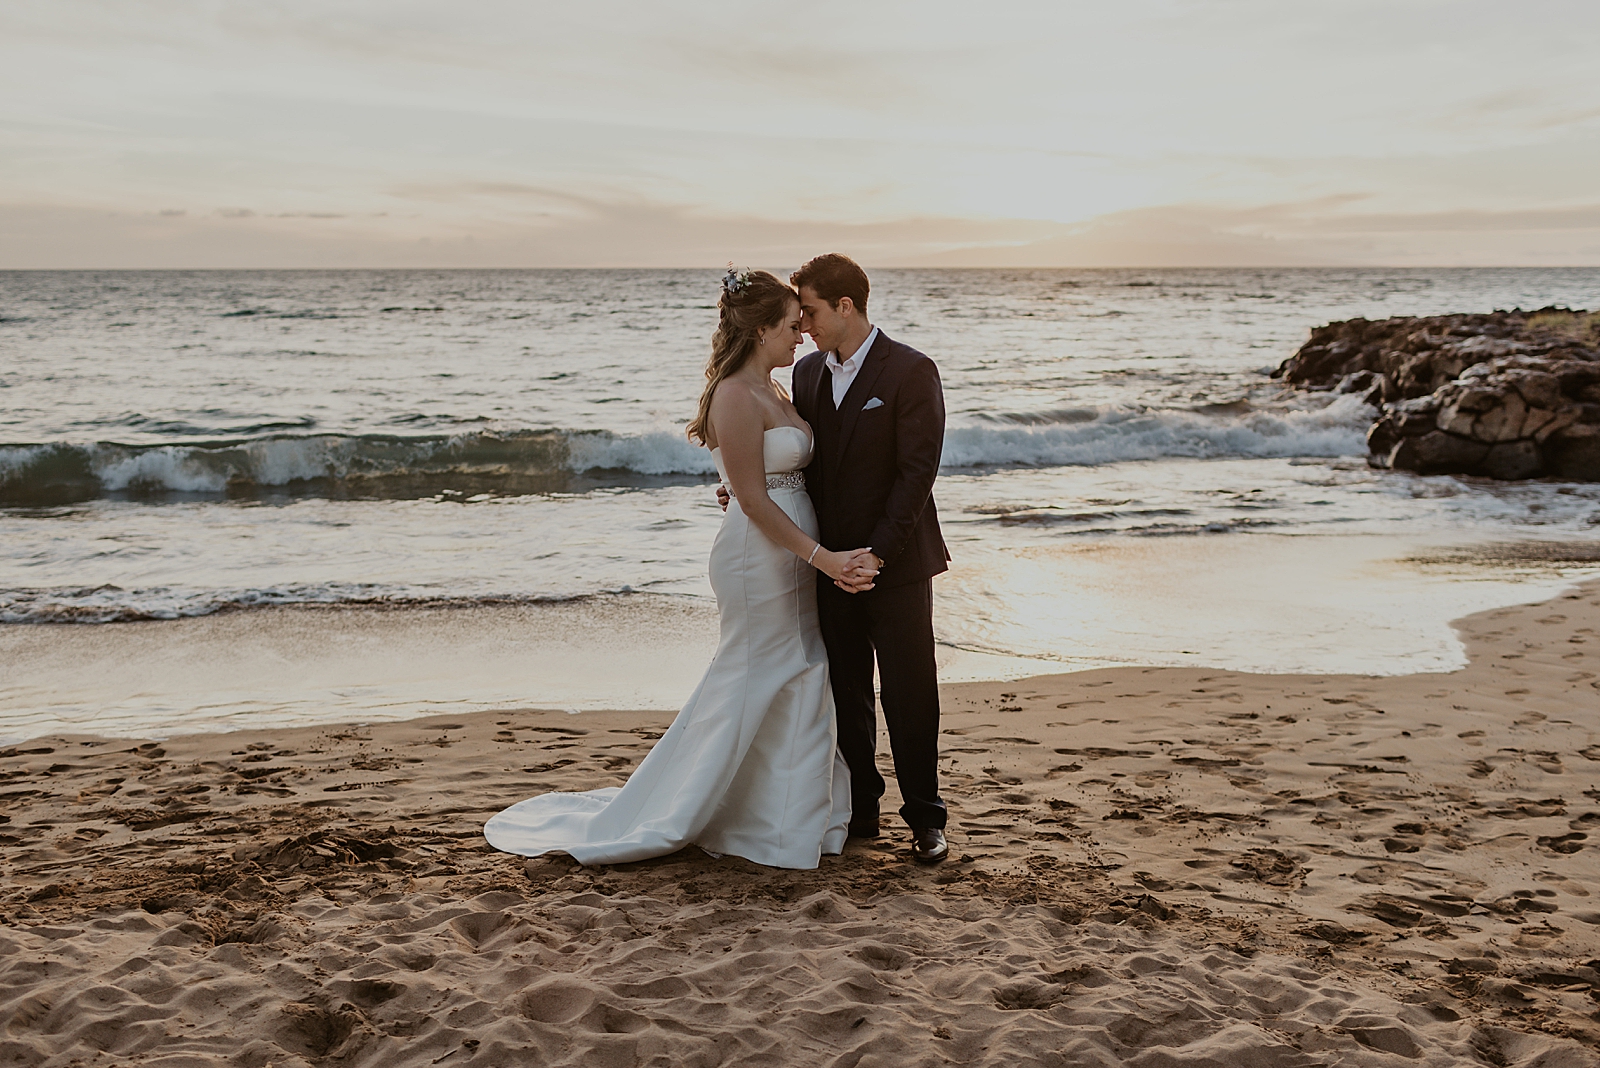 Bride and Groom nuzzling on the sand by incoming ocean waves